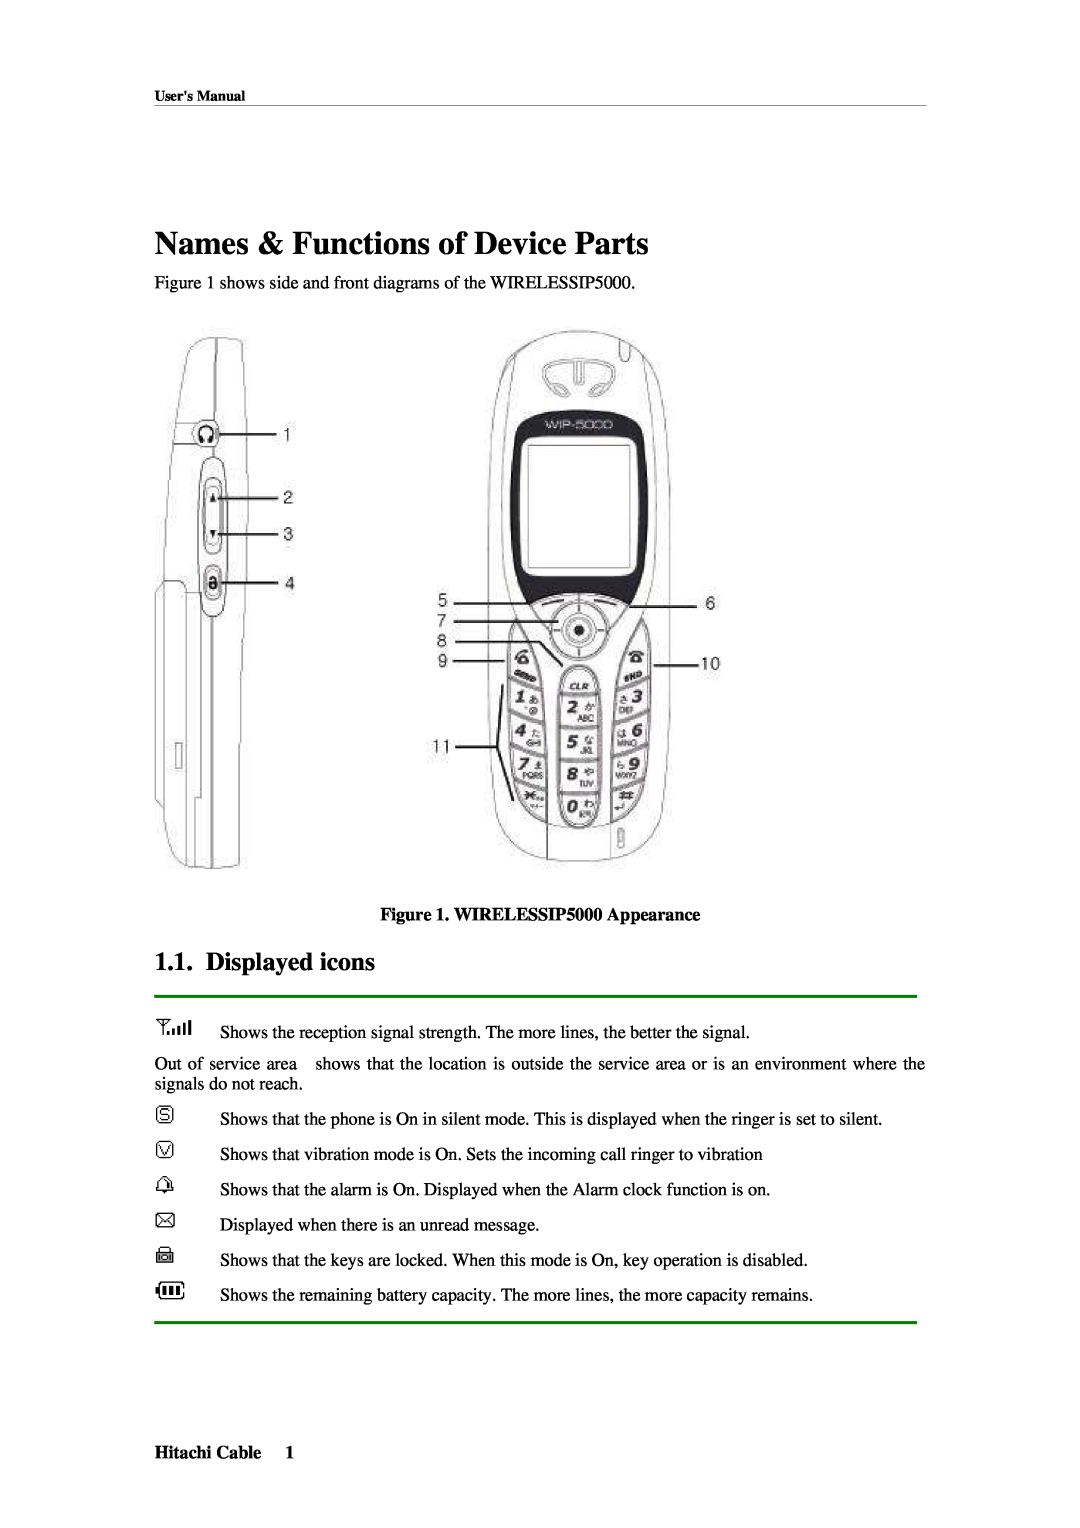 Hitachi TD61-2472 user manual Names & Functions of Device Parts, Displayed icons 